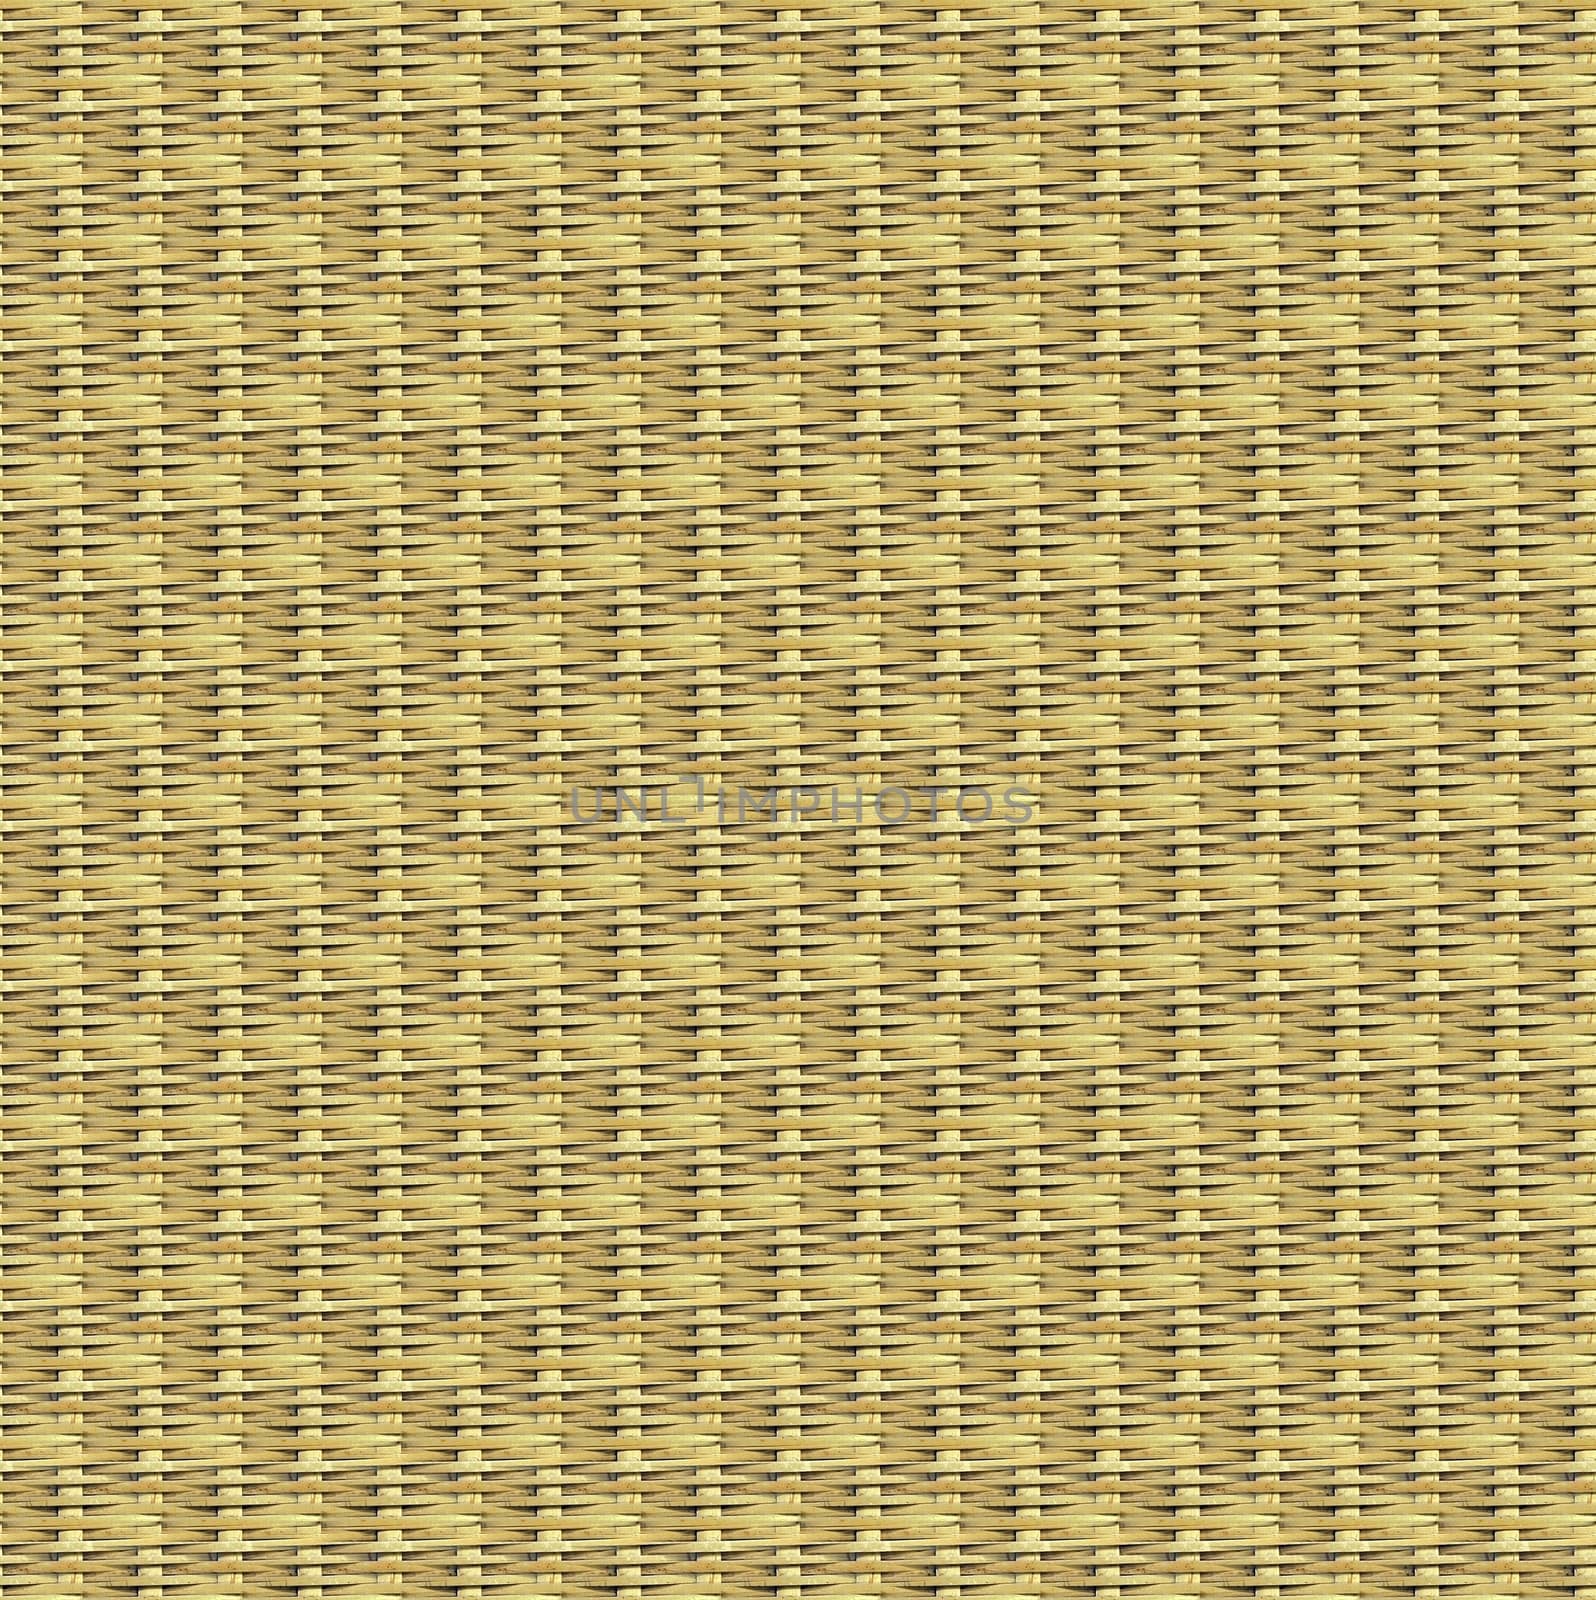 Seamless background of bamboo or rattan basket texture
